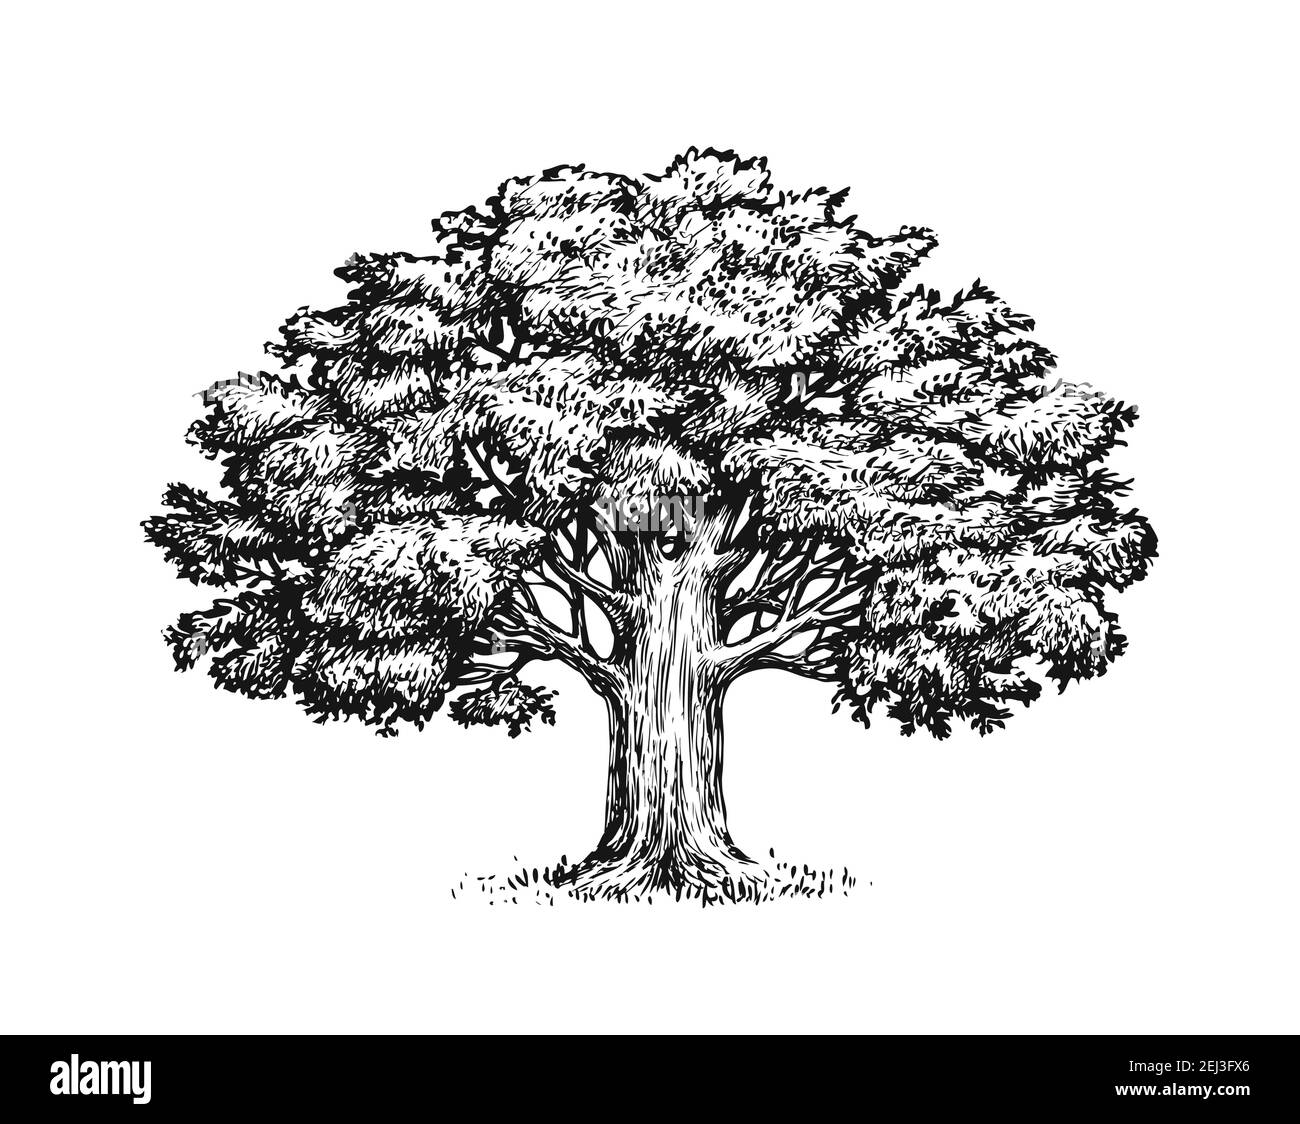 Oak tree with leaves isolated on white background. Vintage sketch vector illustration Stock Vector